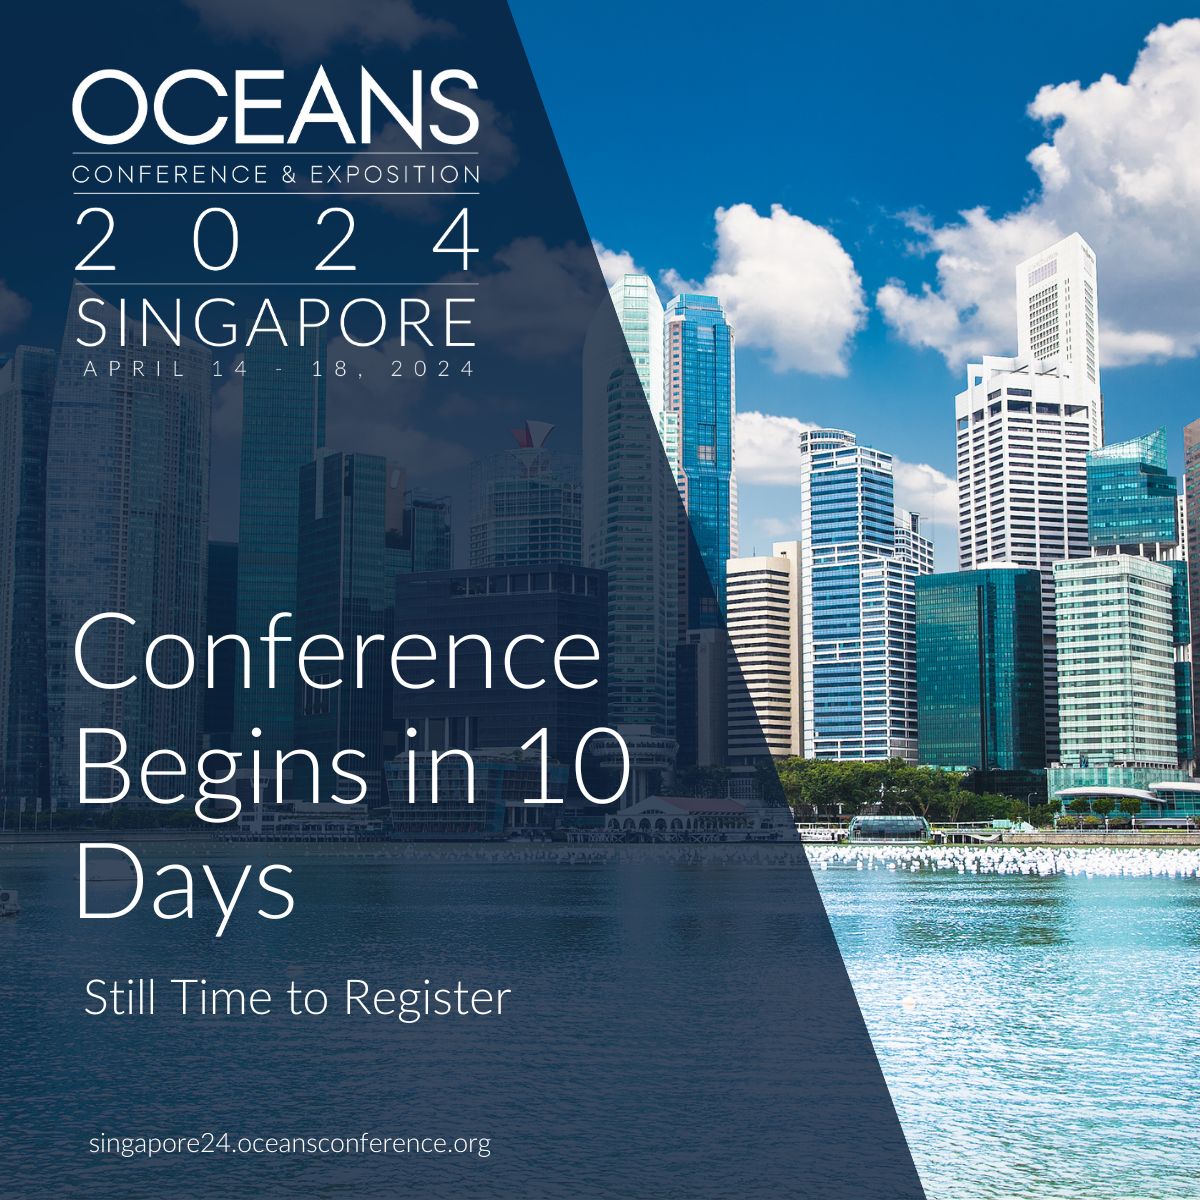 There's still time to register for OCEANS 2024 Singapore! Don't miss out on this incredible opportunity to join industry leaders, innovators, and experts from around the world. 👉Join us: singapore24.oceansconference.org/experience/reg… #OCEANS2024Singapore #OCEANSfanatic #MarineConservation #oceans